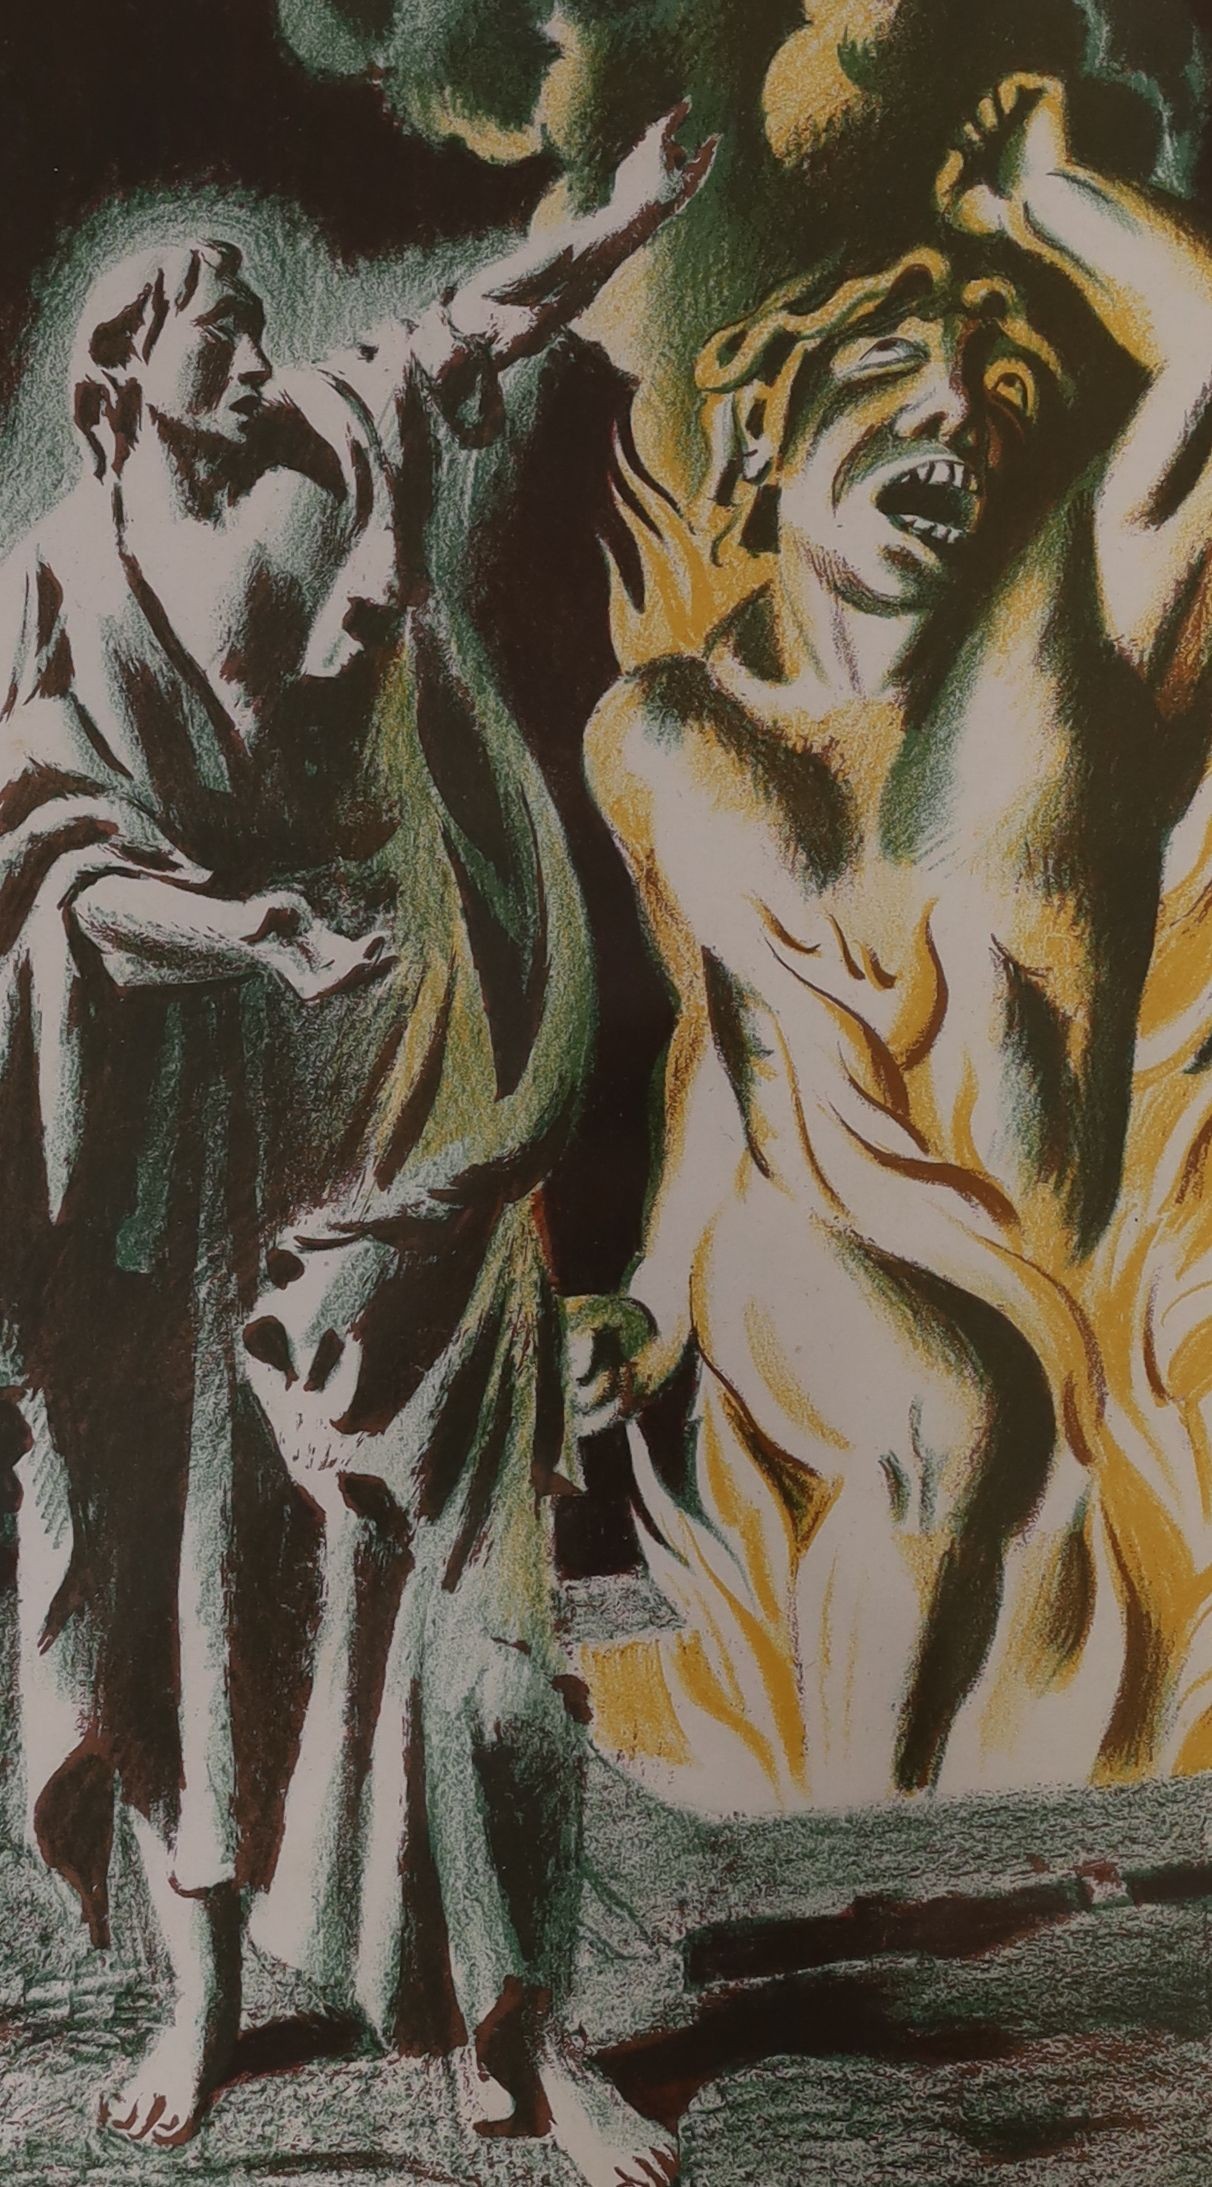 Hans Feibusch (1898-1998), two colour lithographs, 'An Angel opens the pit' and 'The Angel with the book, 35 x 21cm